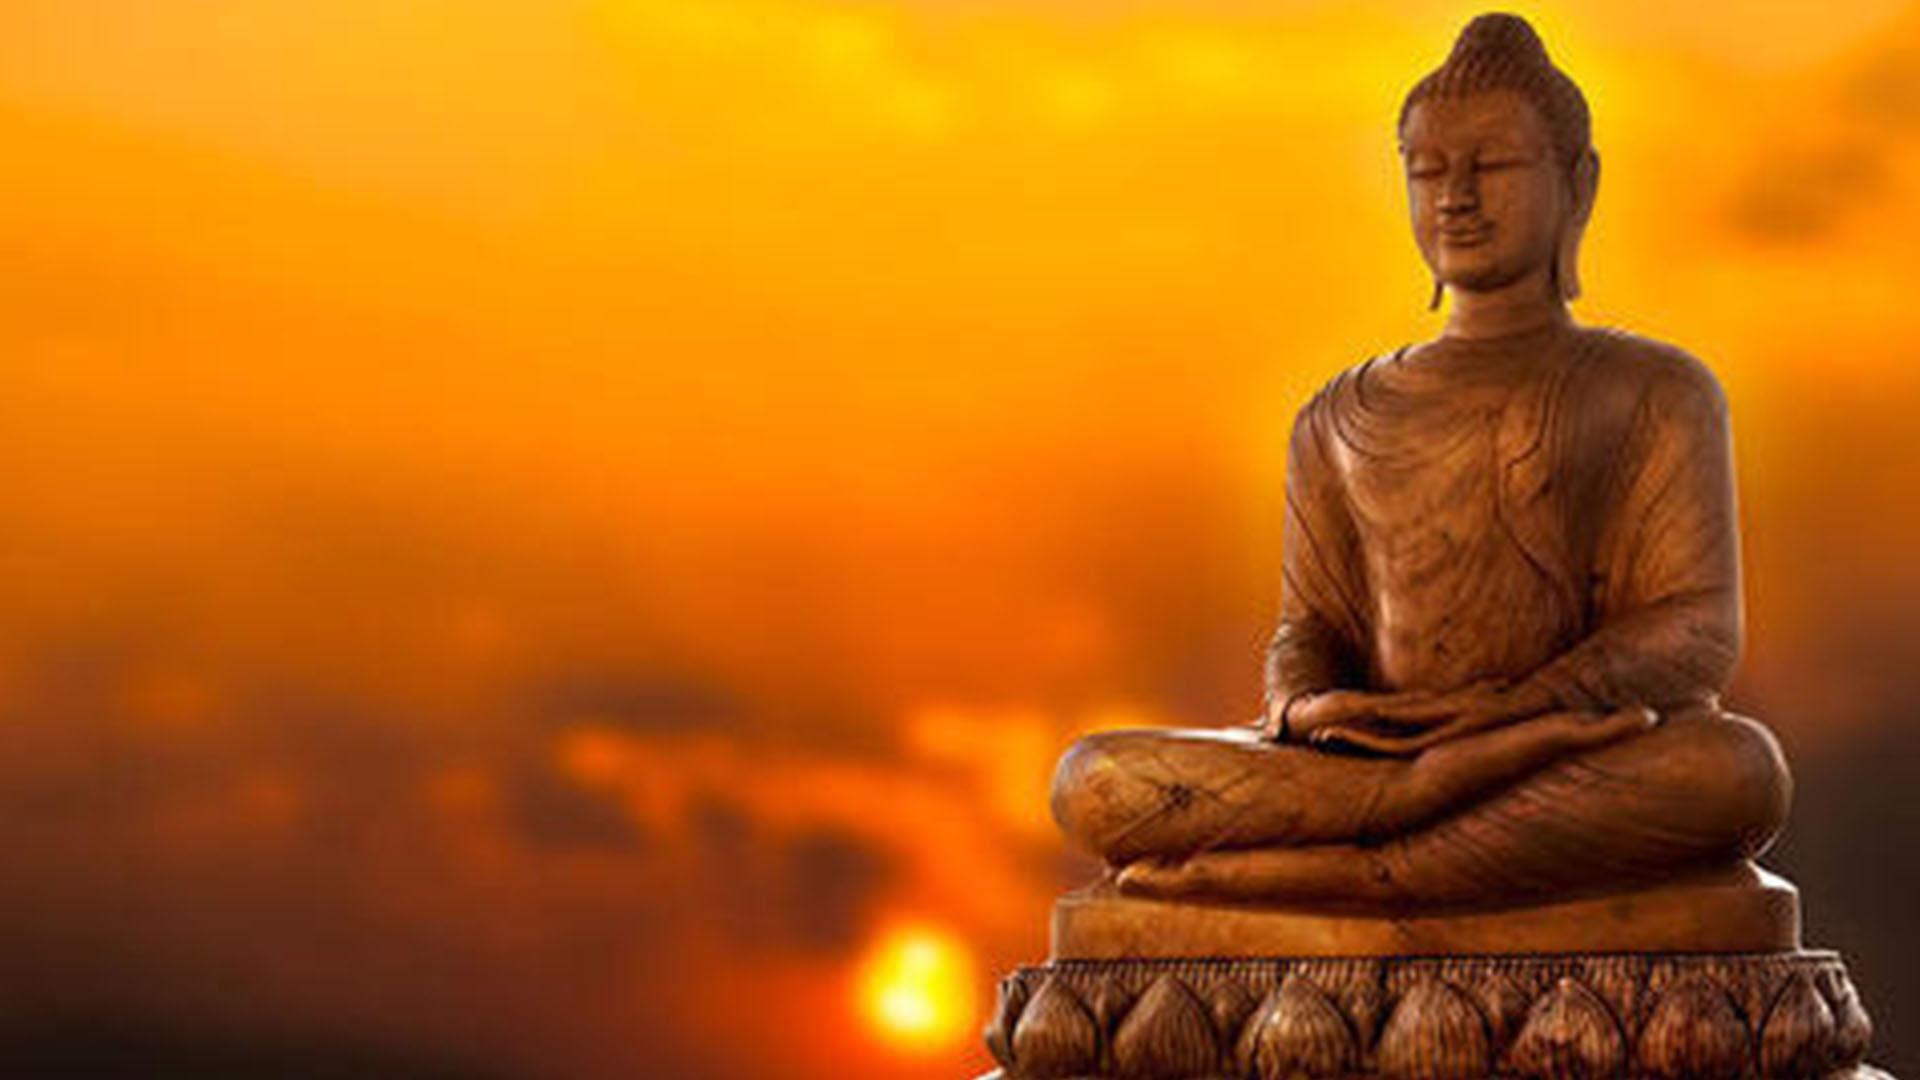 BRIEF INSIGHT TO BUDDHISM– “A way of Life” IN THE VERGE OF EXTINCTION